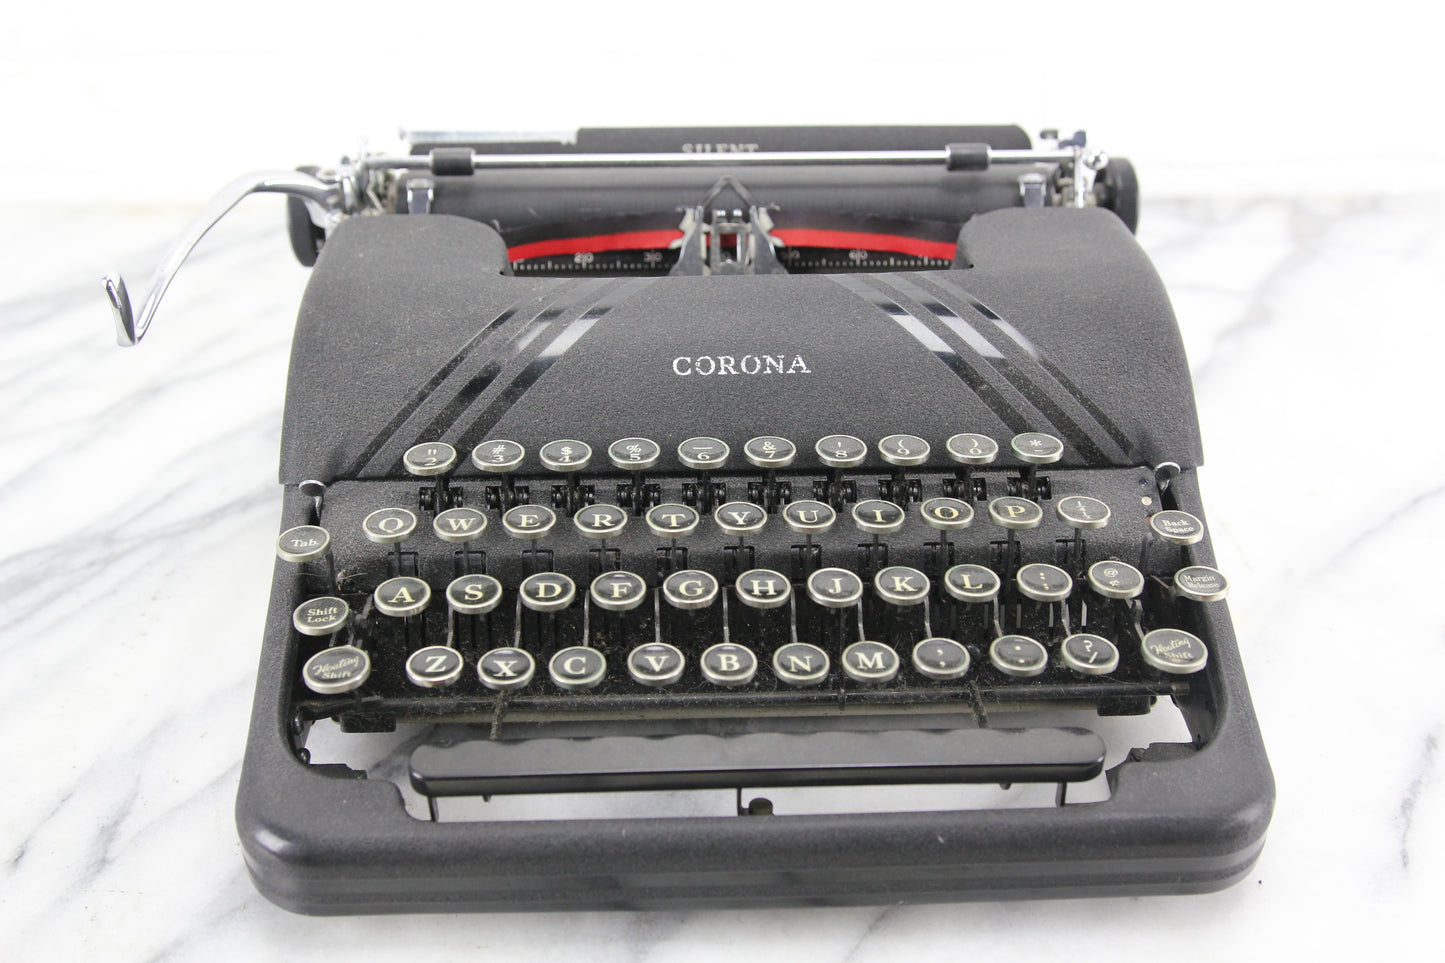 Smith Corona Silent Portable Typewriter with Case, Made in USA, 1939